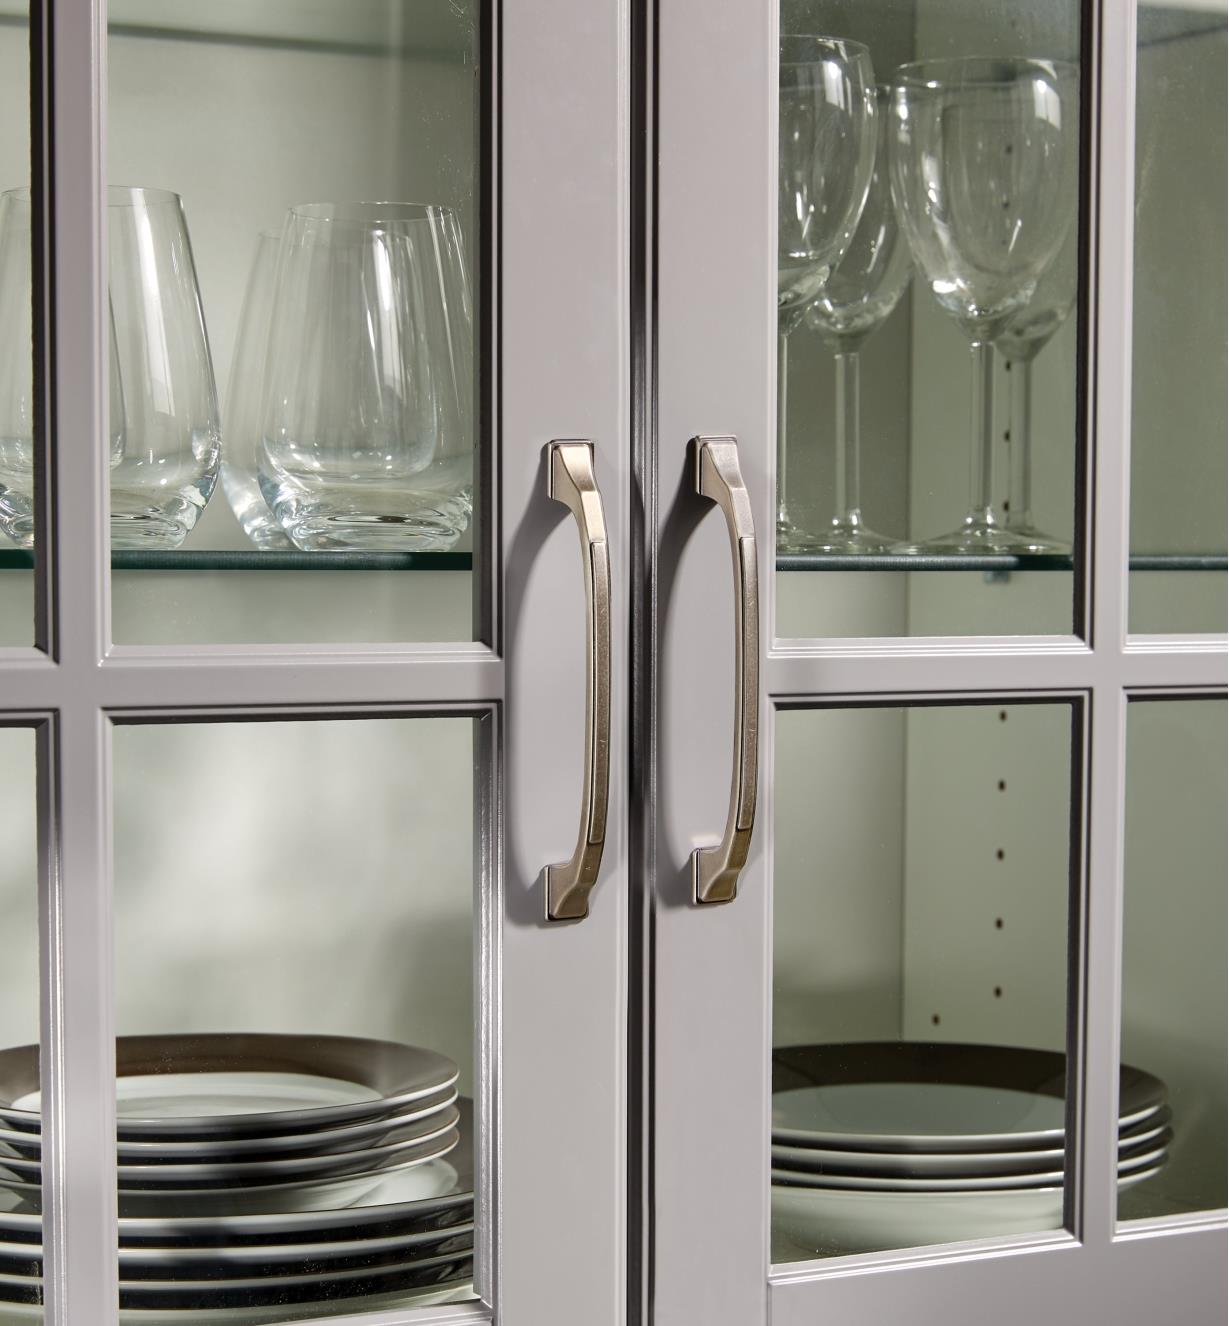 Two 128mm × 24mm pewter Imperia handles mounted on glass cabinet doors